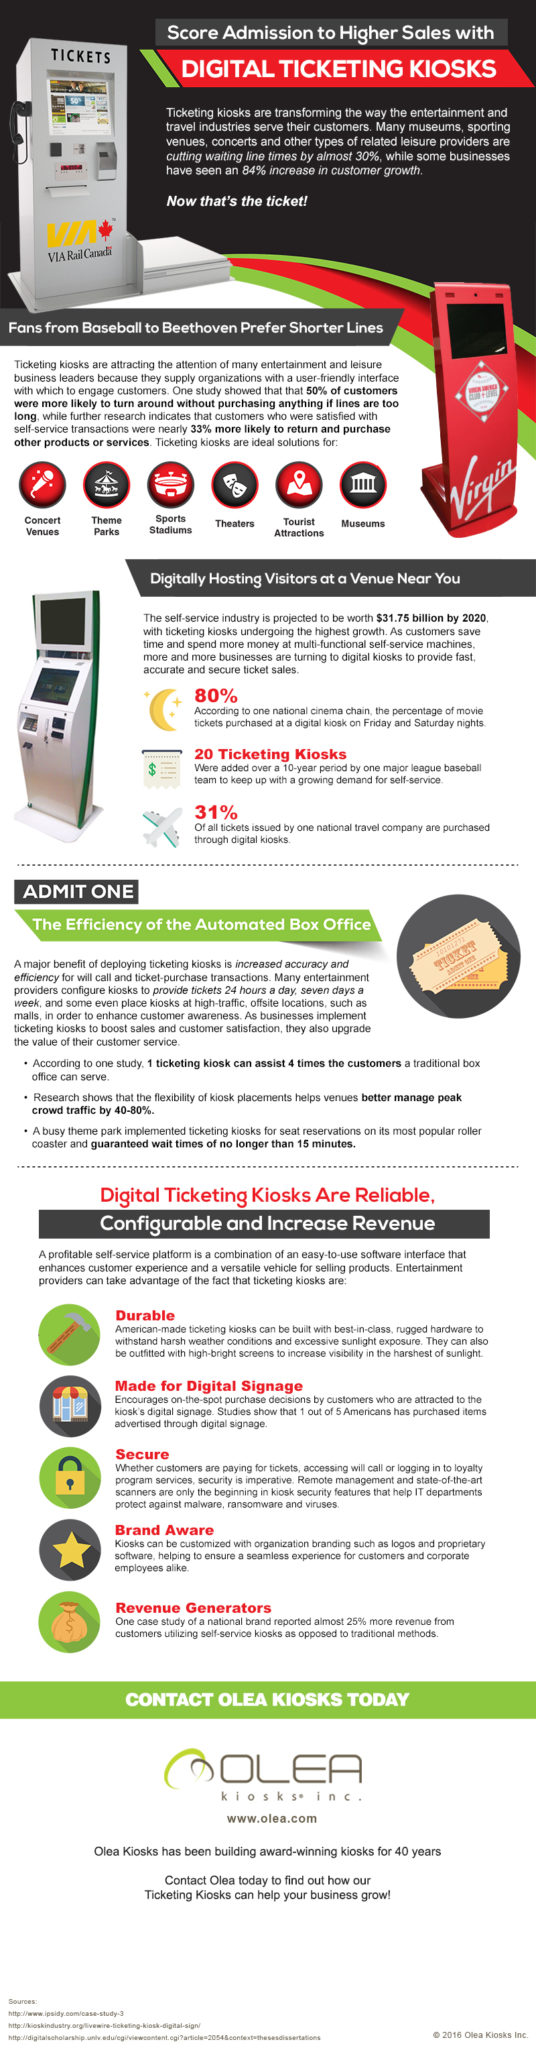 Ticketing Kiosks - The Key to Shorter Lines and More Revenue